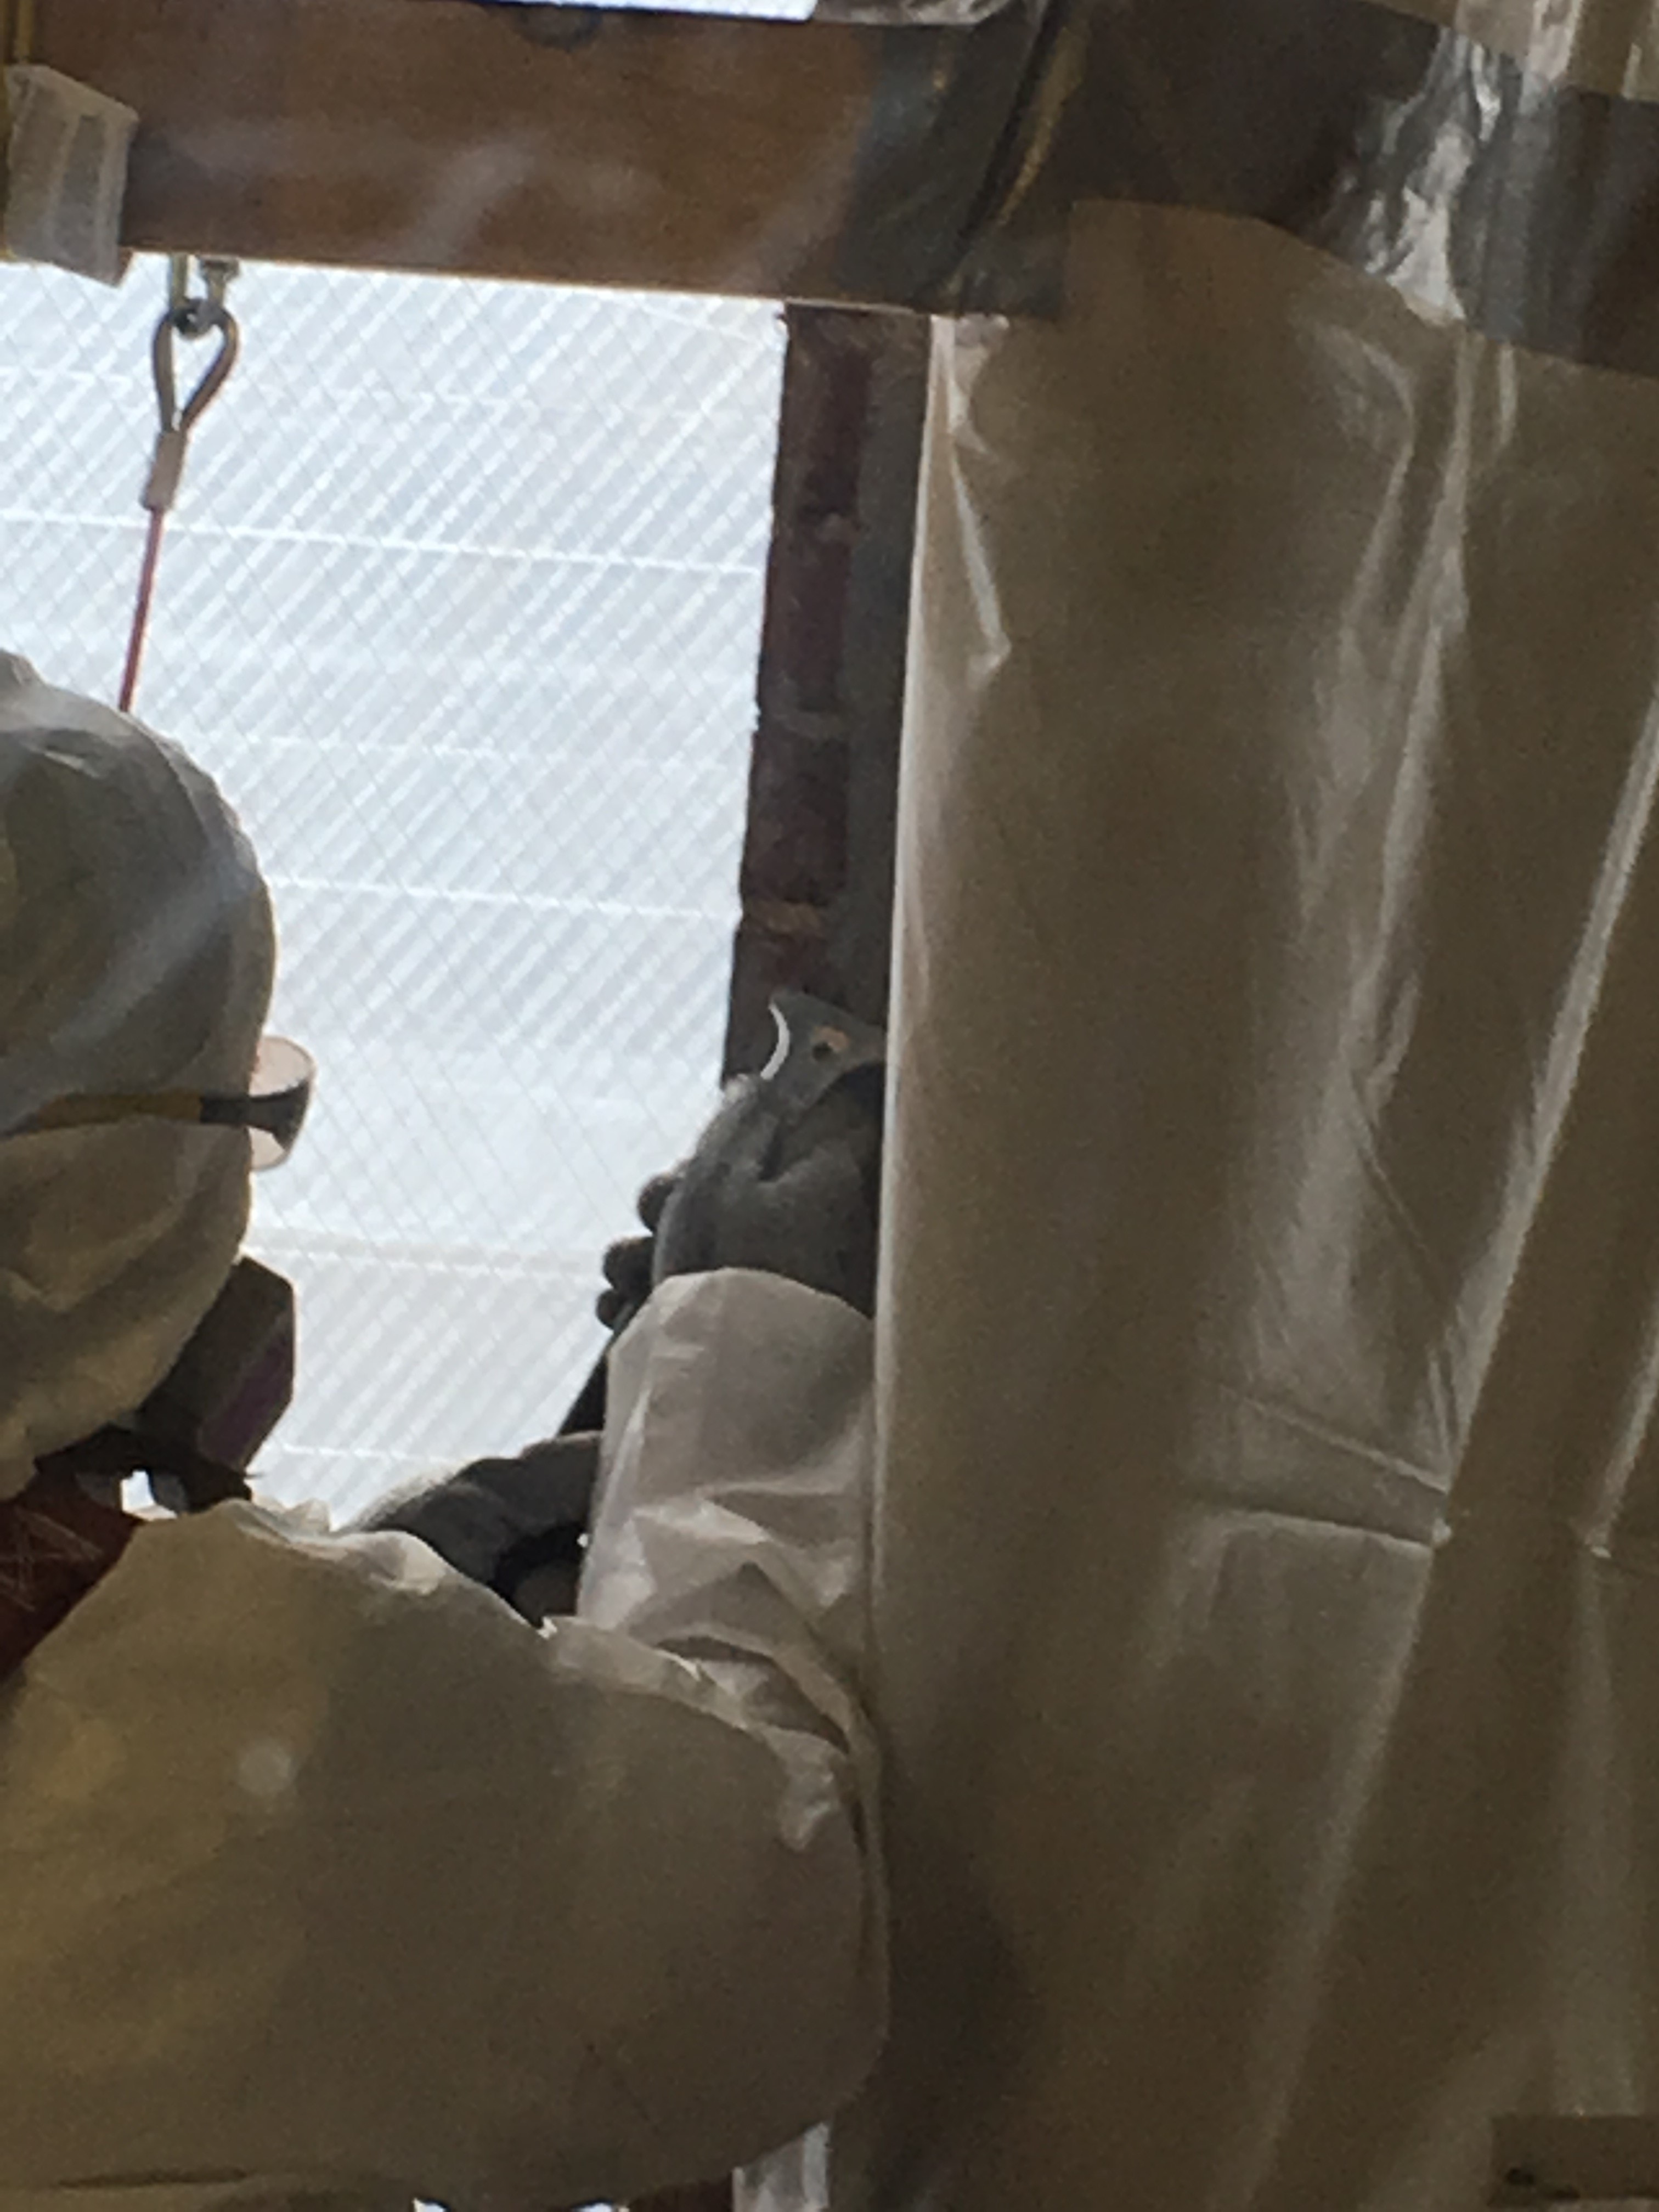 A worker in full hazmat (eye protection, respiratory protection, tyvek coveralls, gloves) scrapes PCB/Asbestos caulk from brick.